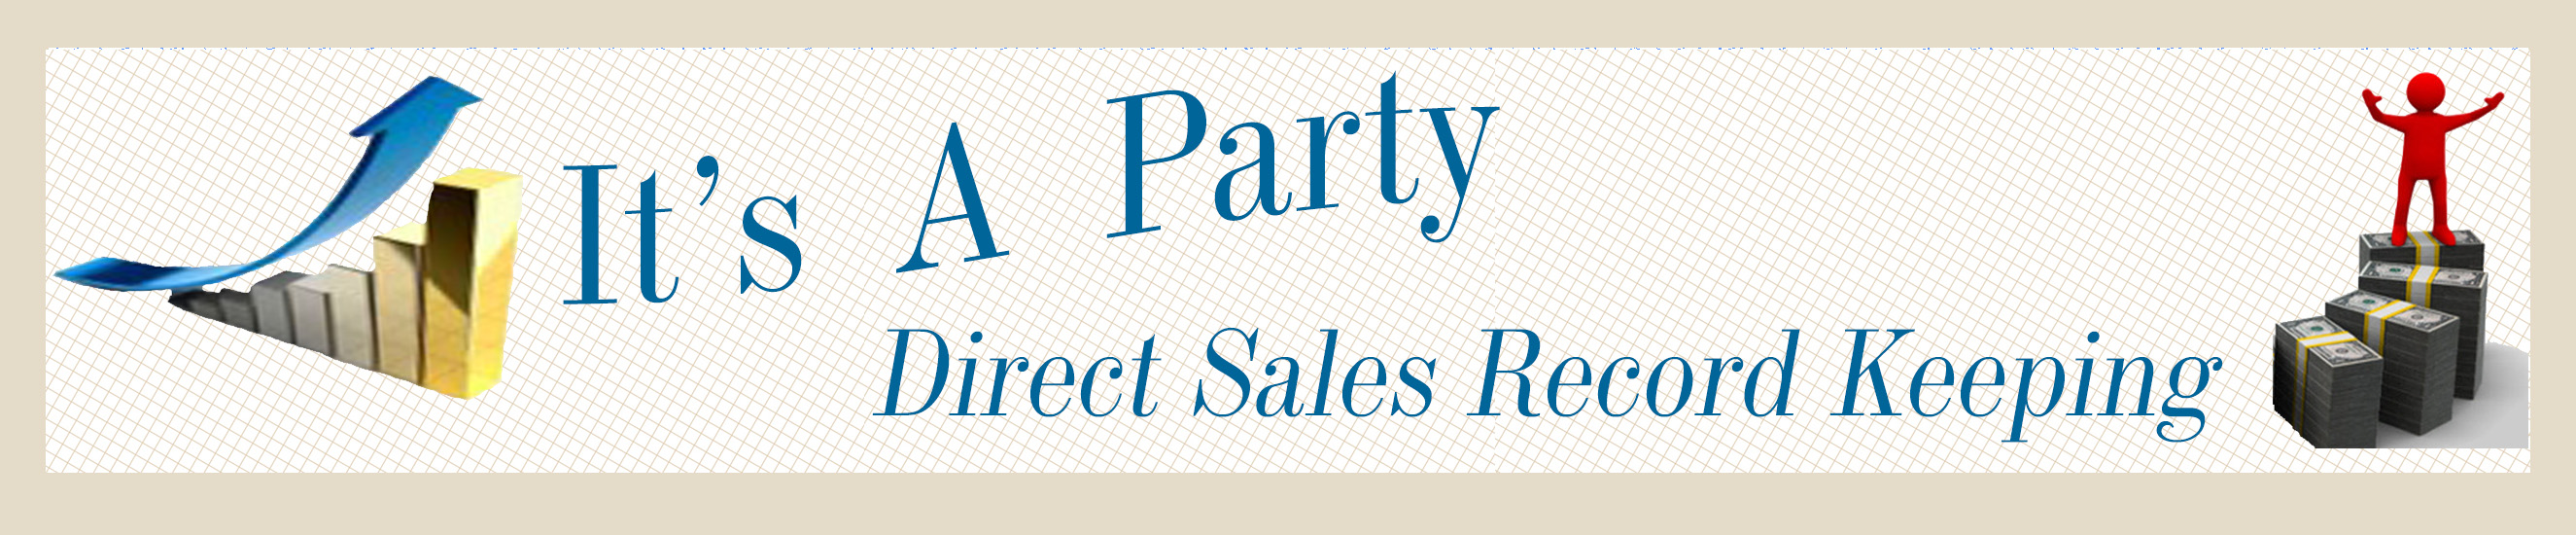 It's A Party - Direct Sales Record Keeping Logo